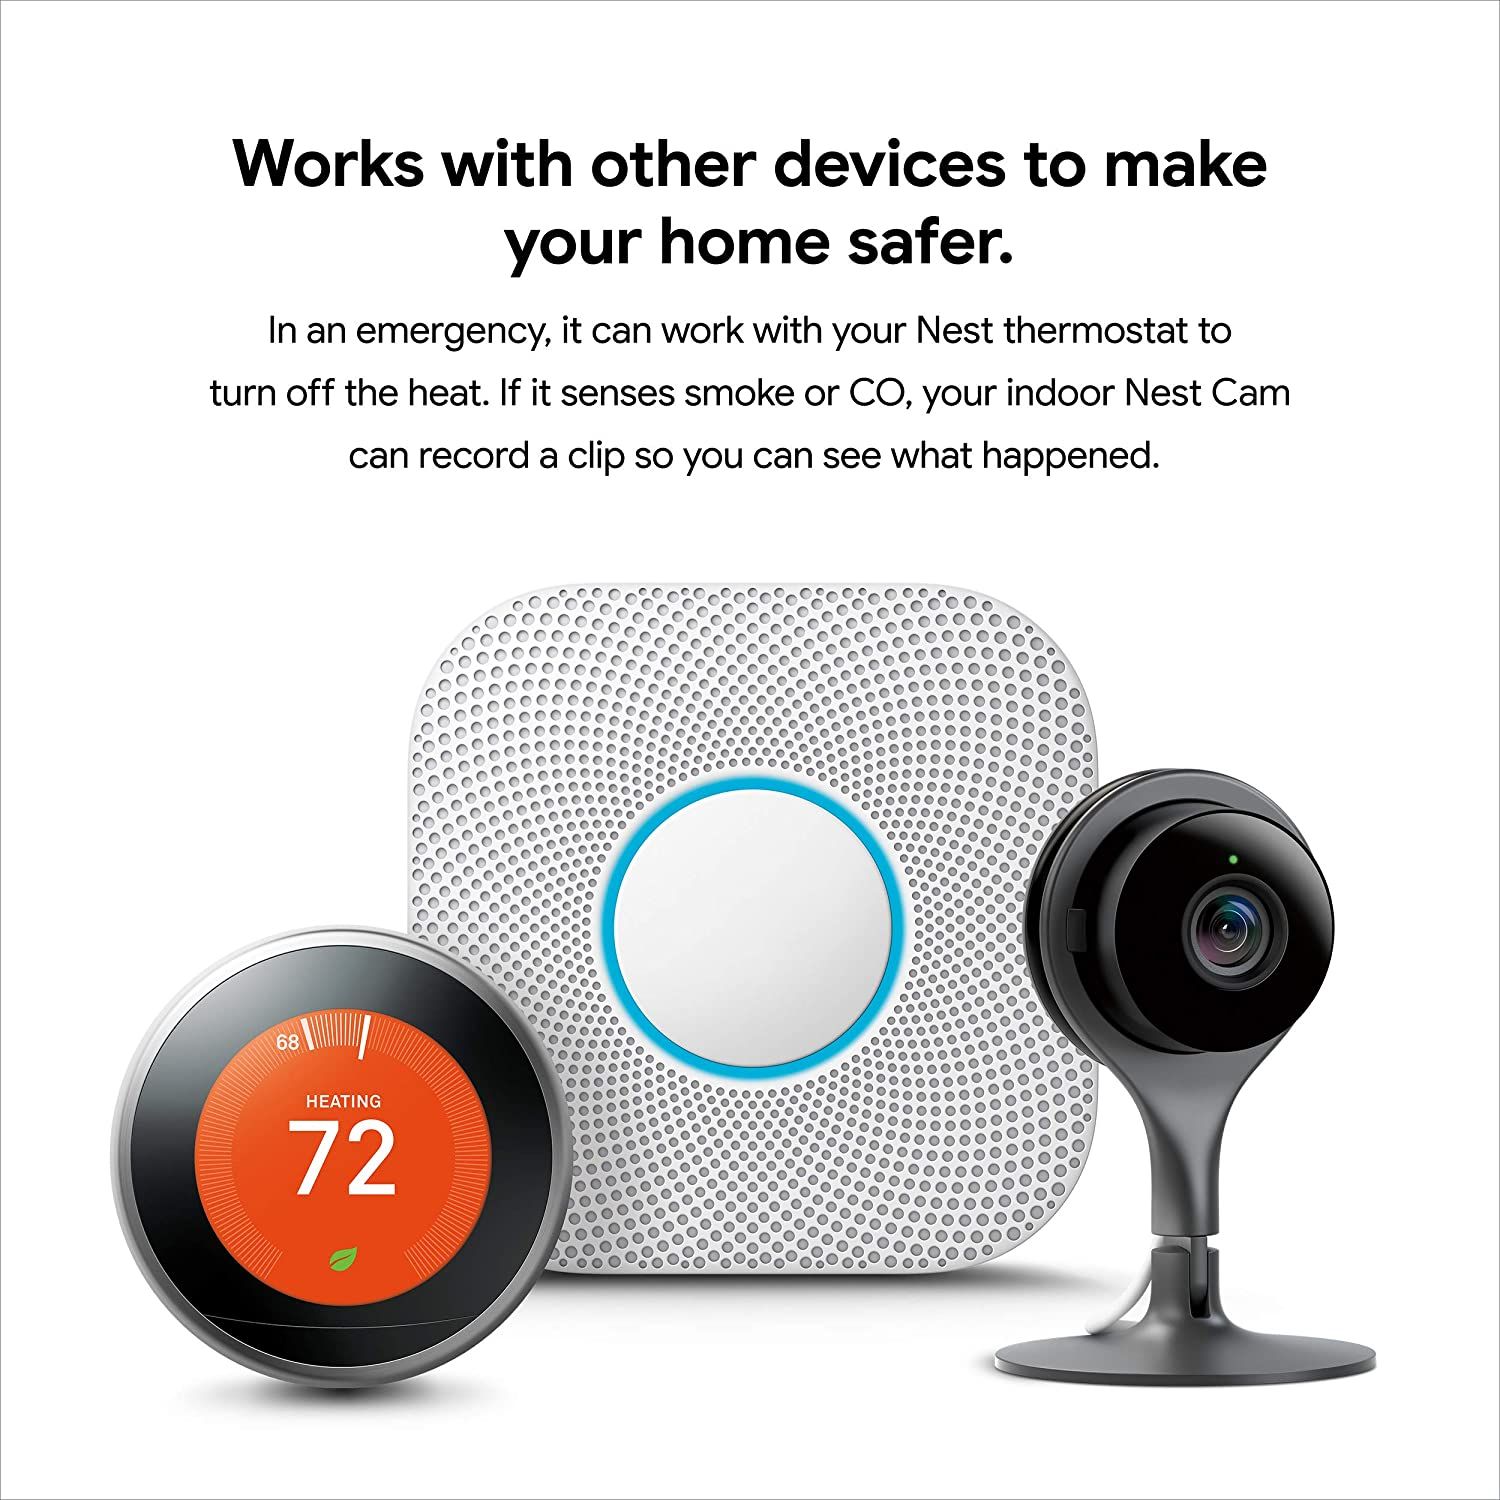 Google Nest Protect devices